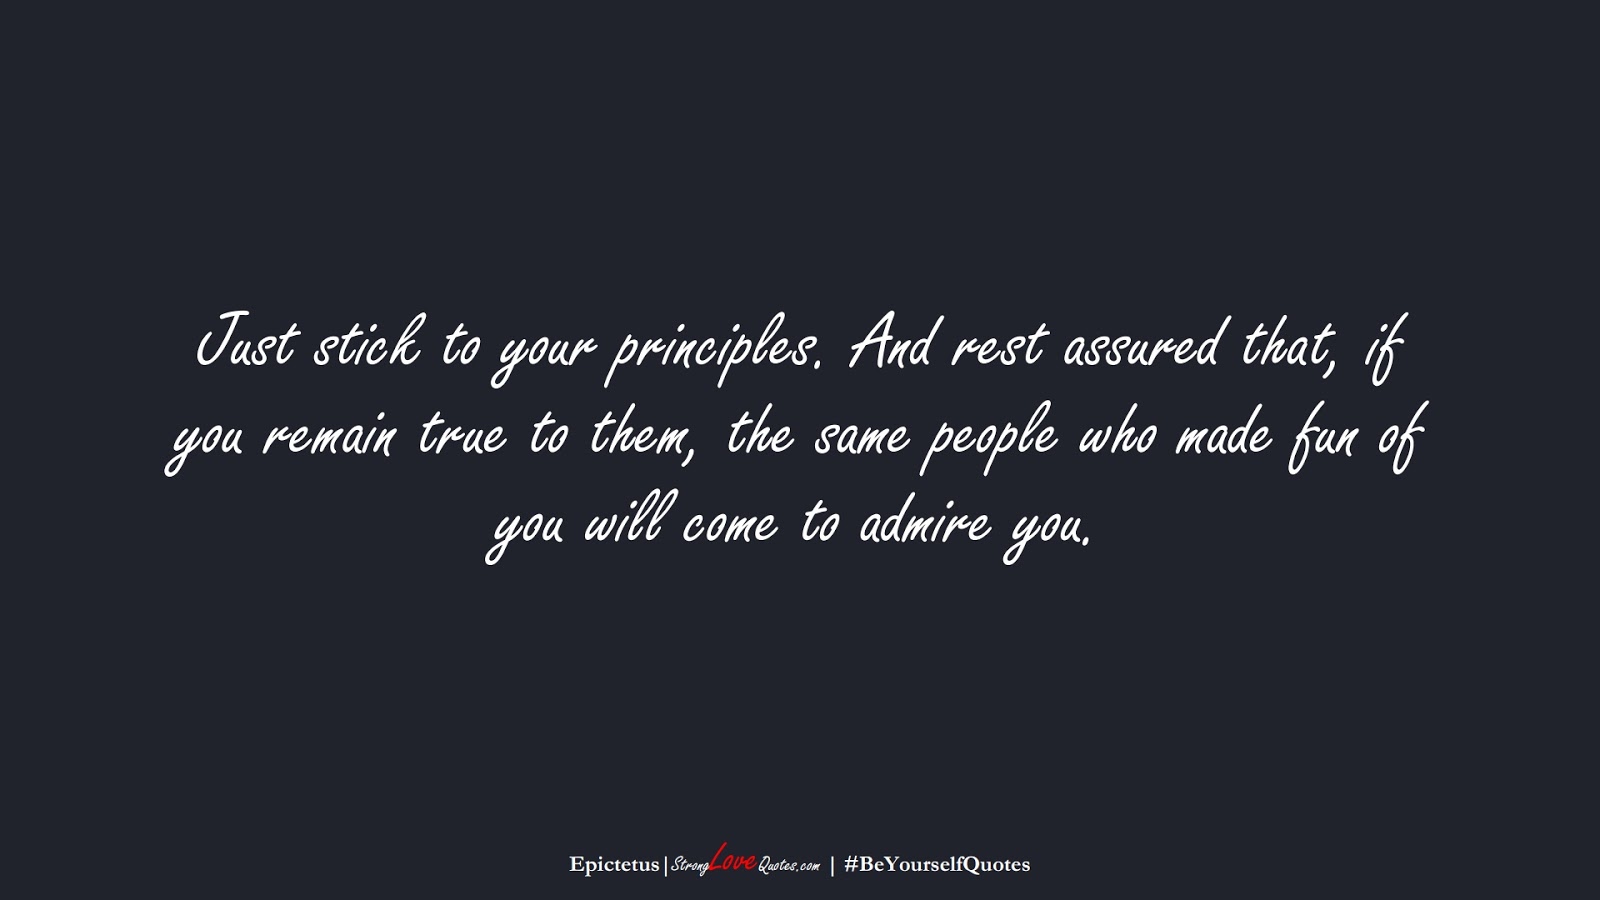 Just stick to your principles. And rest assured that, if you remain true to them, the same people who made fun of you will come to admire you. (Epictetus);  #BeYourselfQuotes